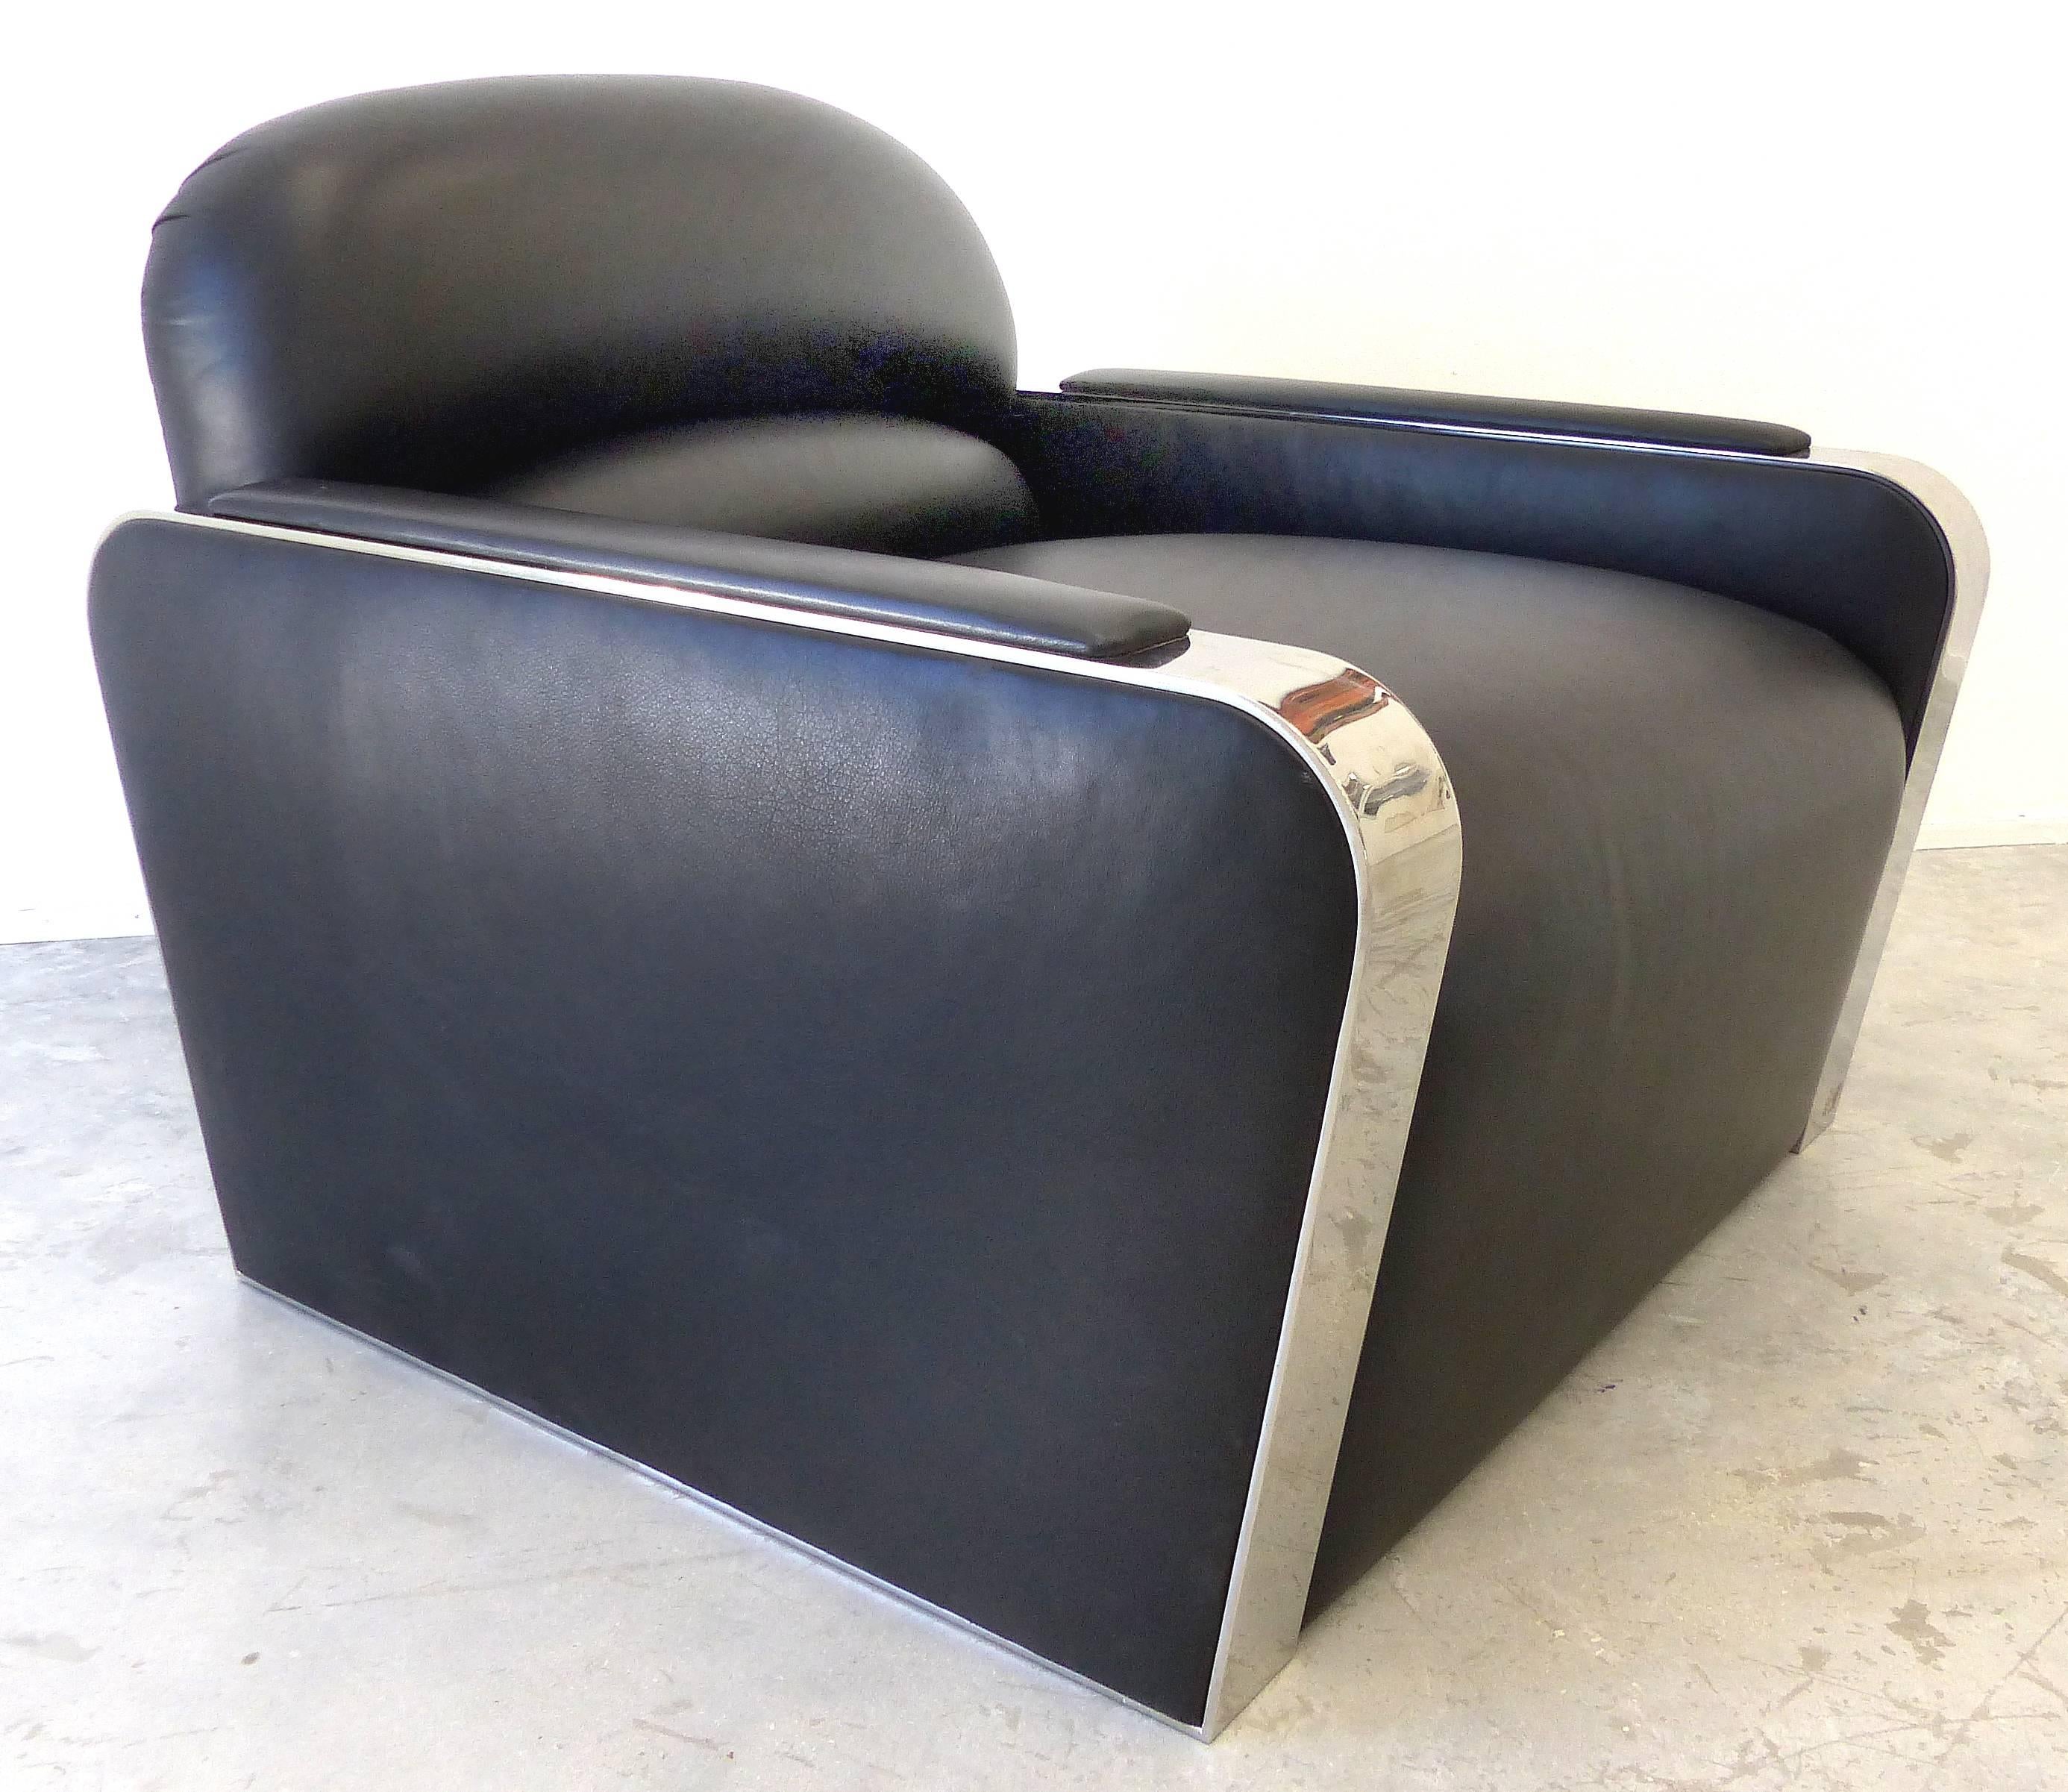 Stanley Jay Friedman for Brueton Stainless and Leather Habana Chairs, Pair

Offered for sale are a substantial and comfortable pair of Art Deco inspired 